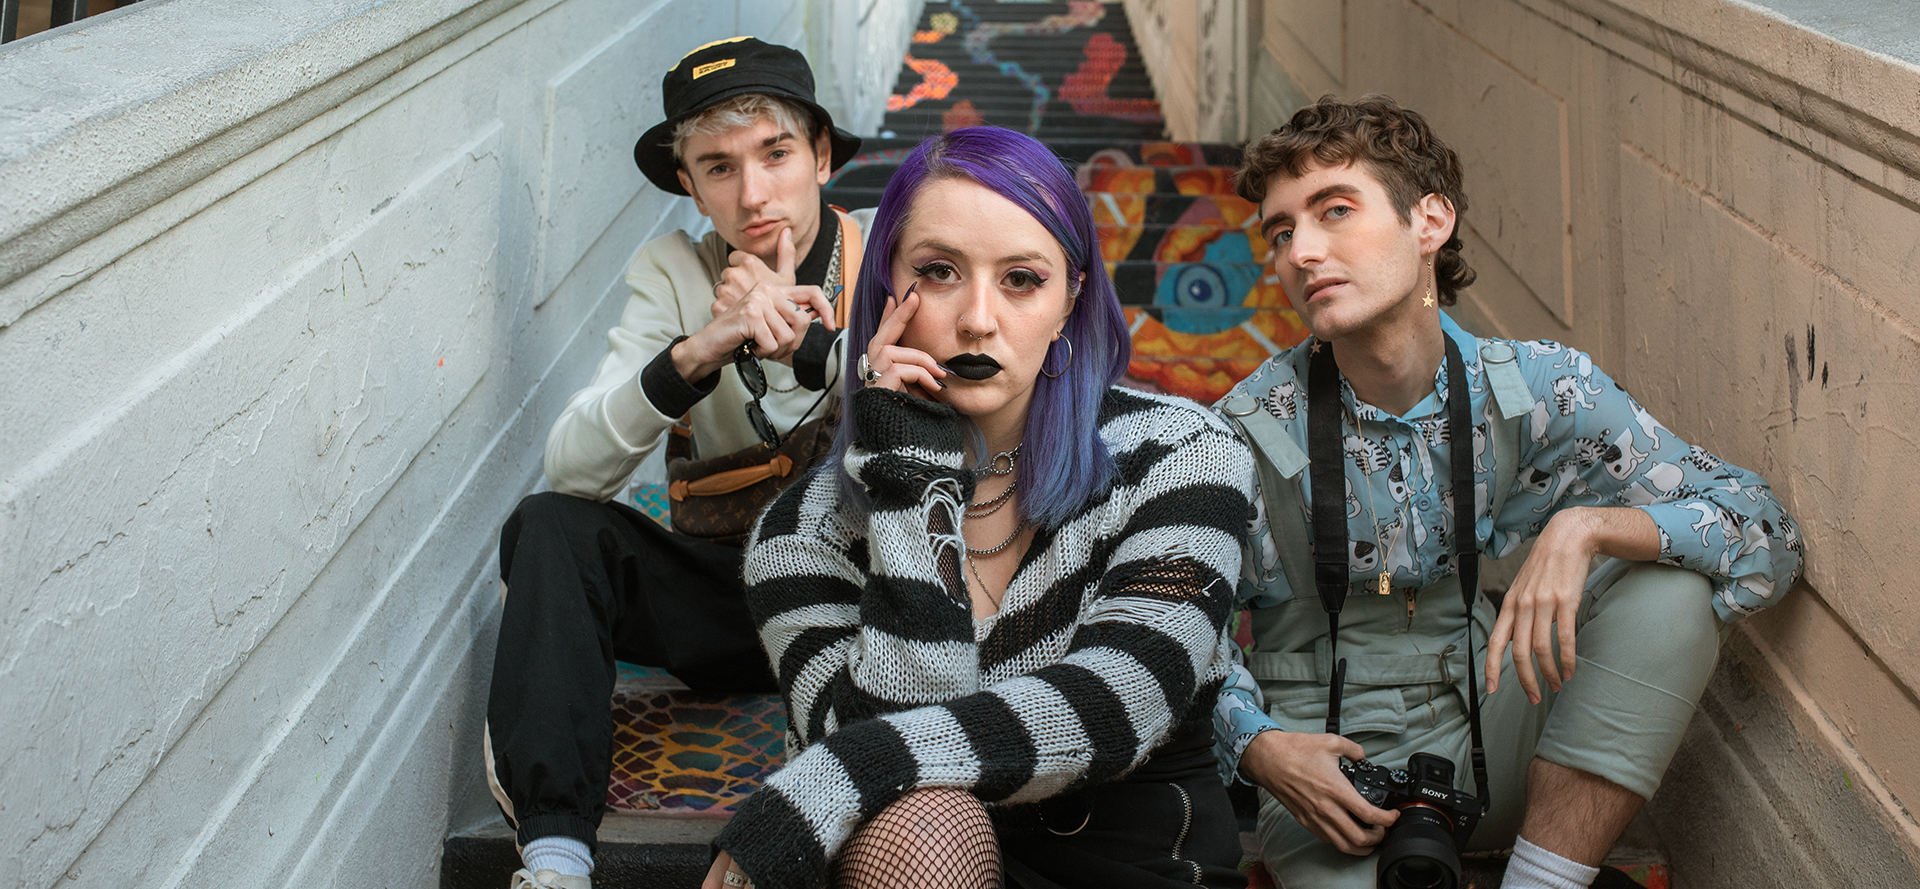 A girl with purple hair sits on the stairs with her friends.